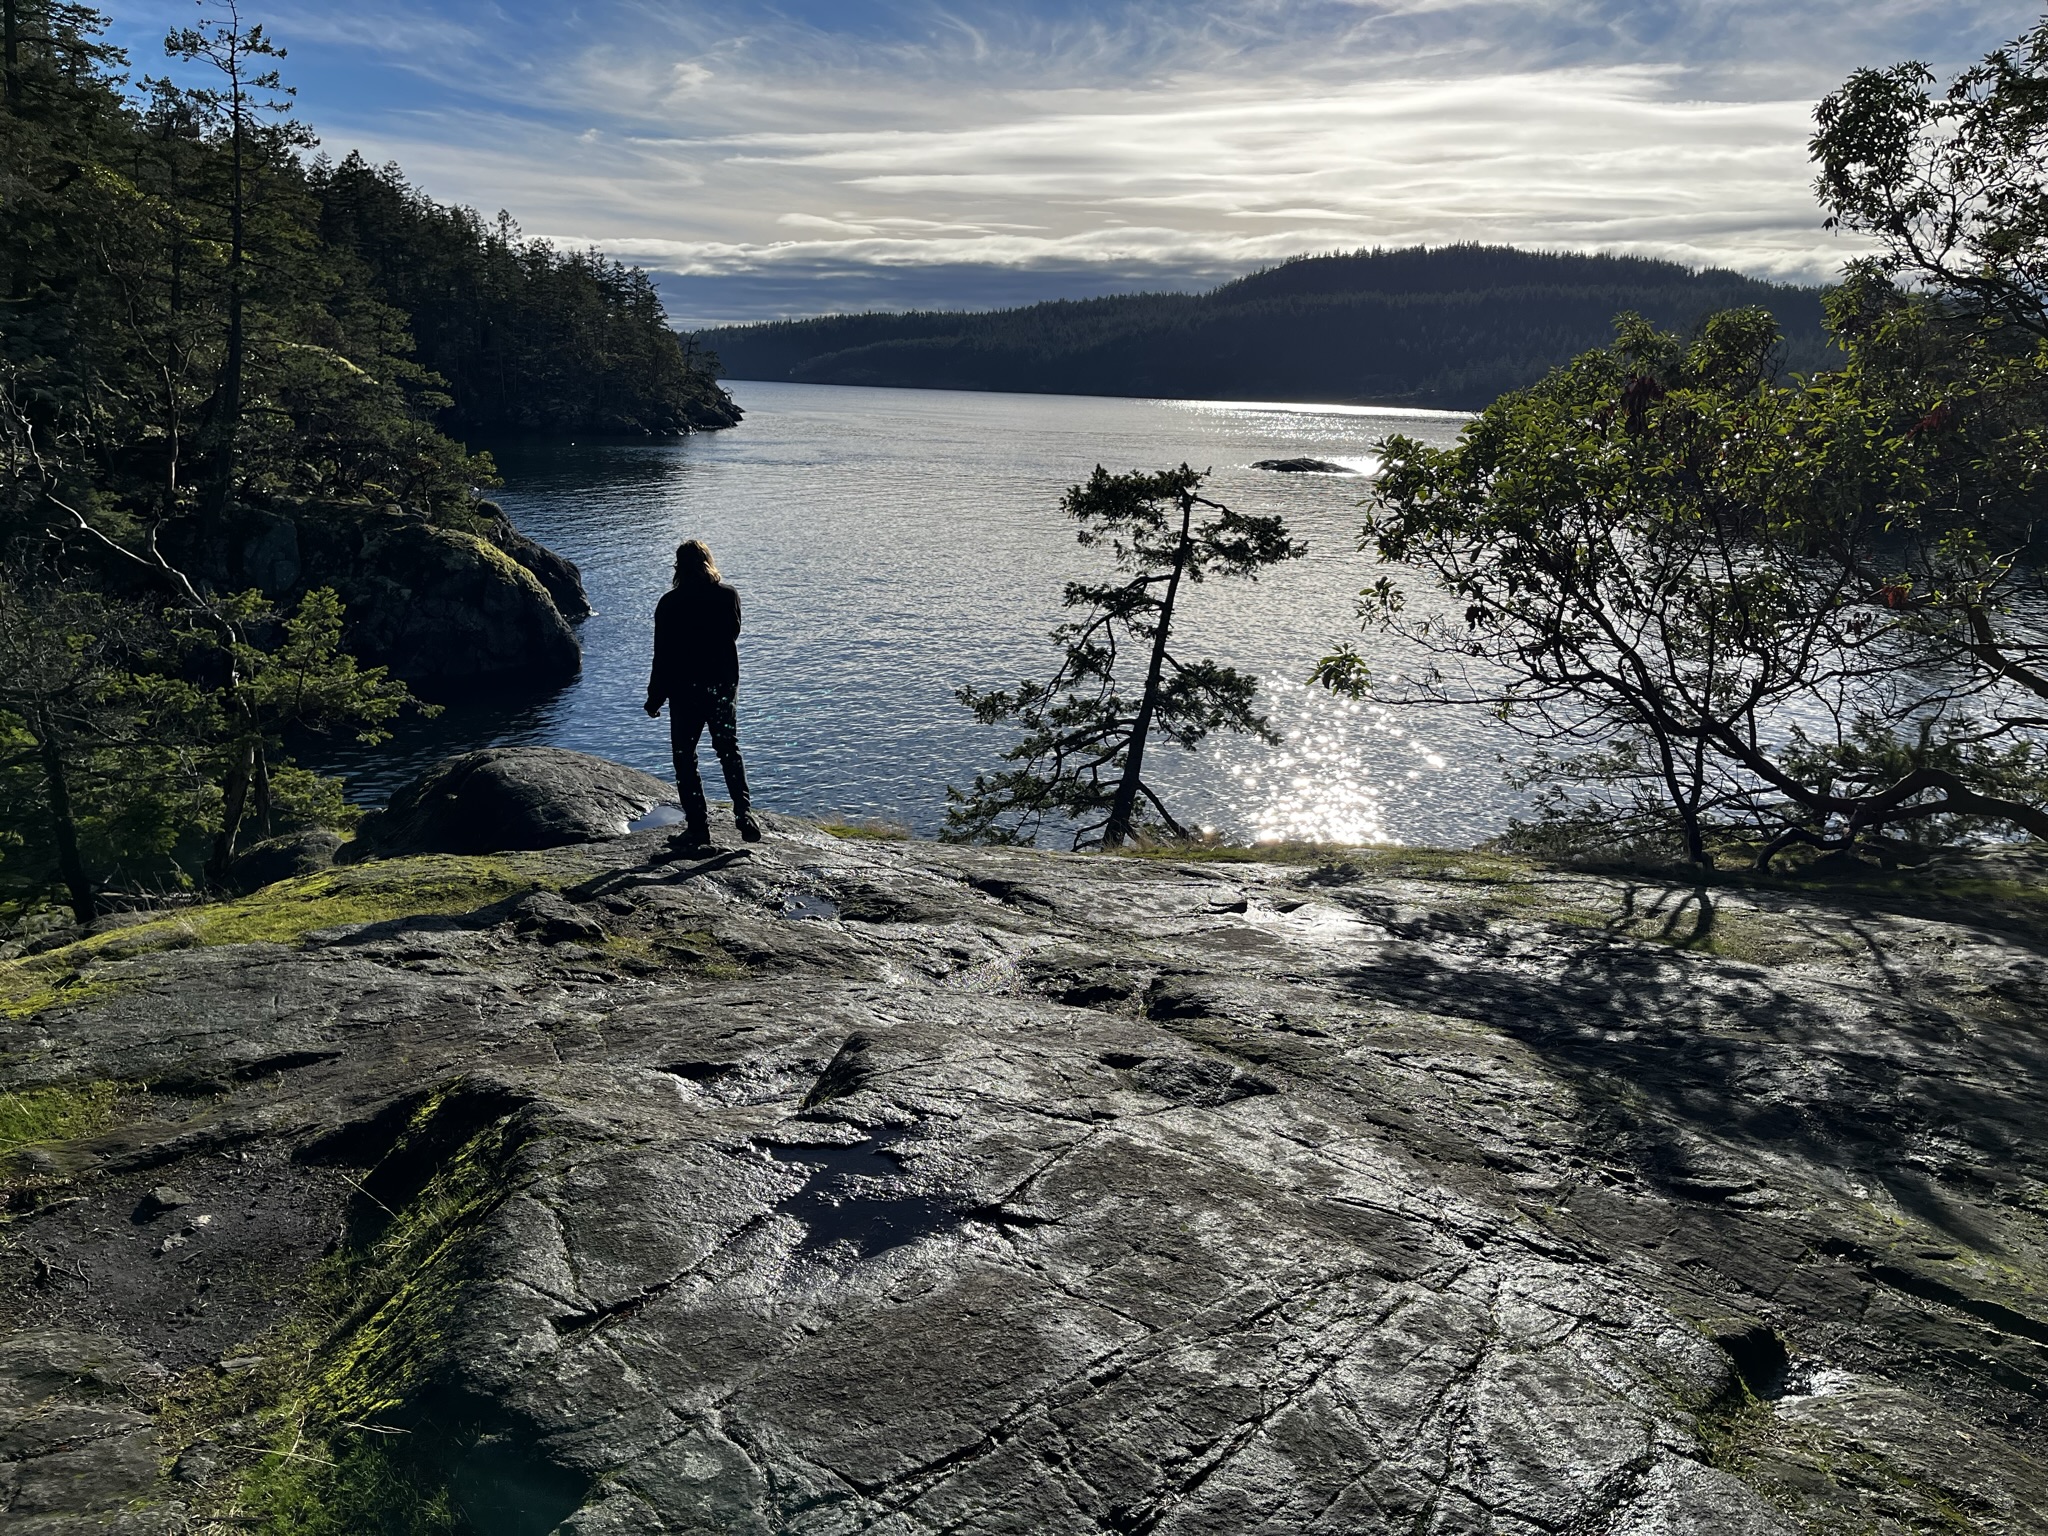 Sam at Smuggler Cove overlooking distant Thormanby Island